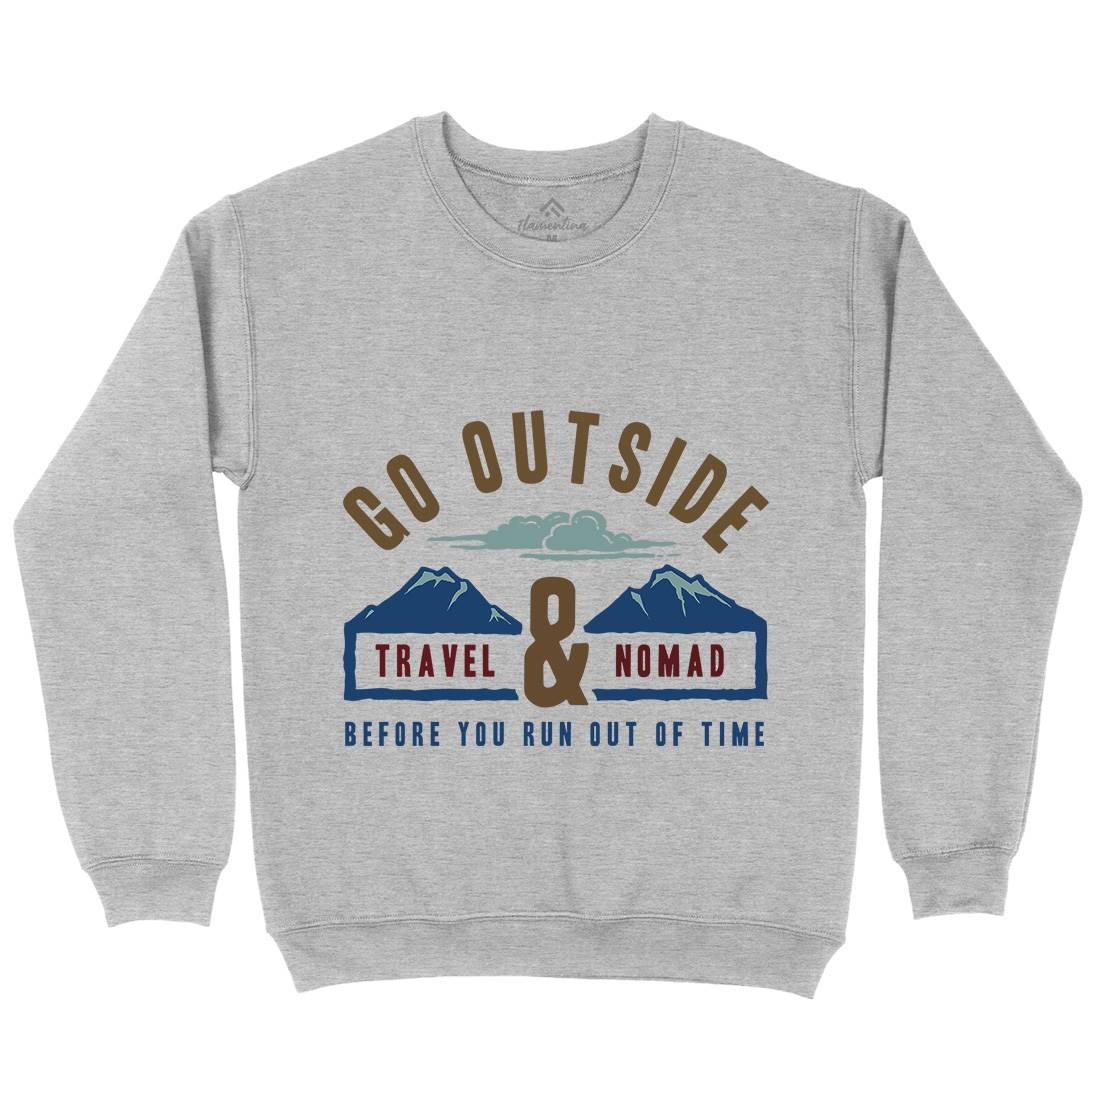 Travel And Nomad Kids Crew Neck Sweatshirt Nature A388